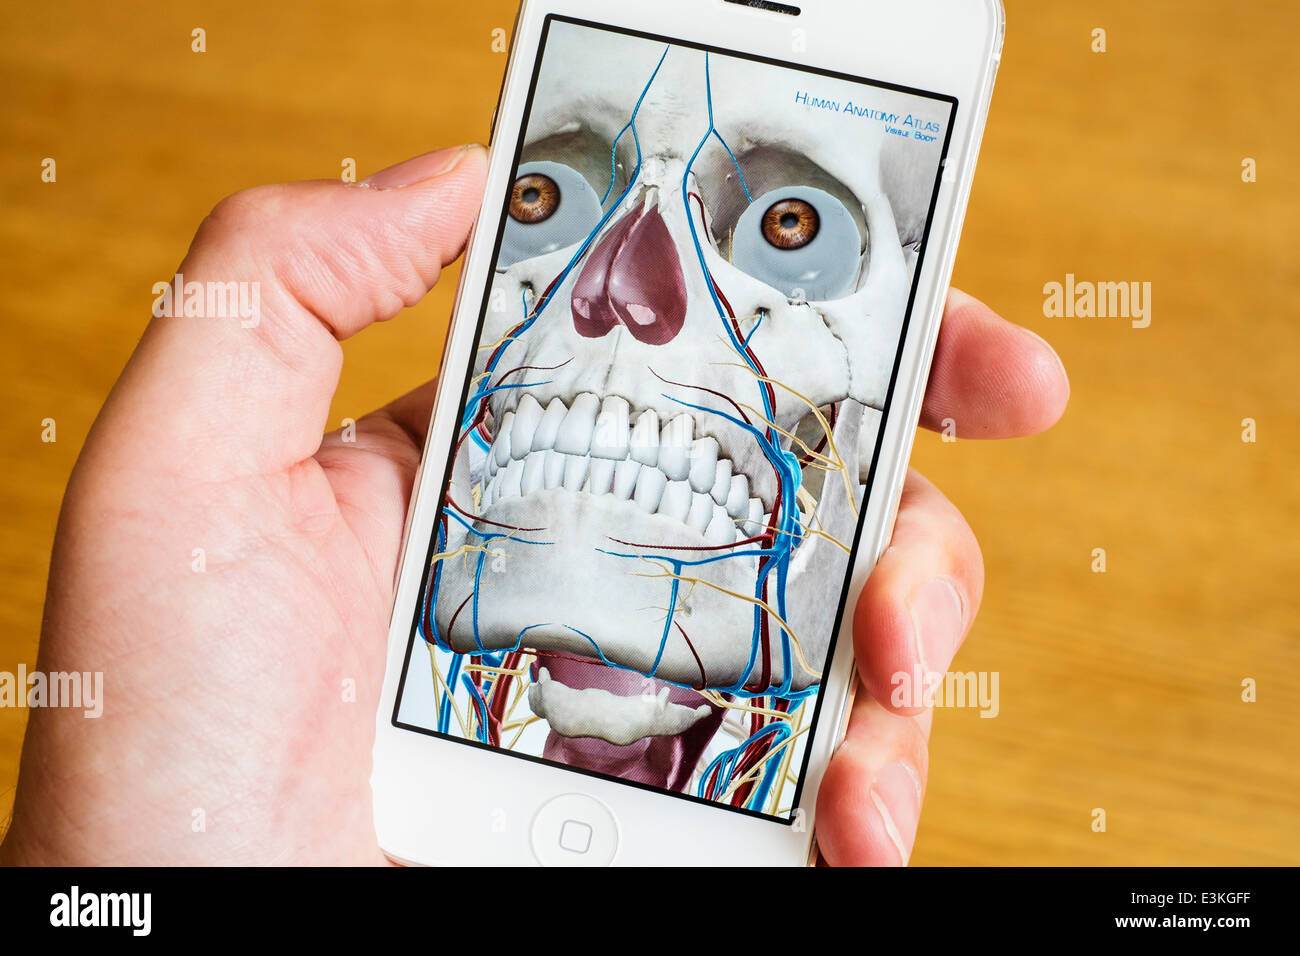 Detail of educational medical 3D human anatomy atlas on an iPhone smart phone Stock Photo